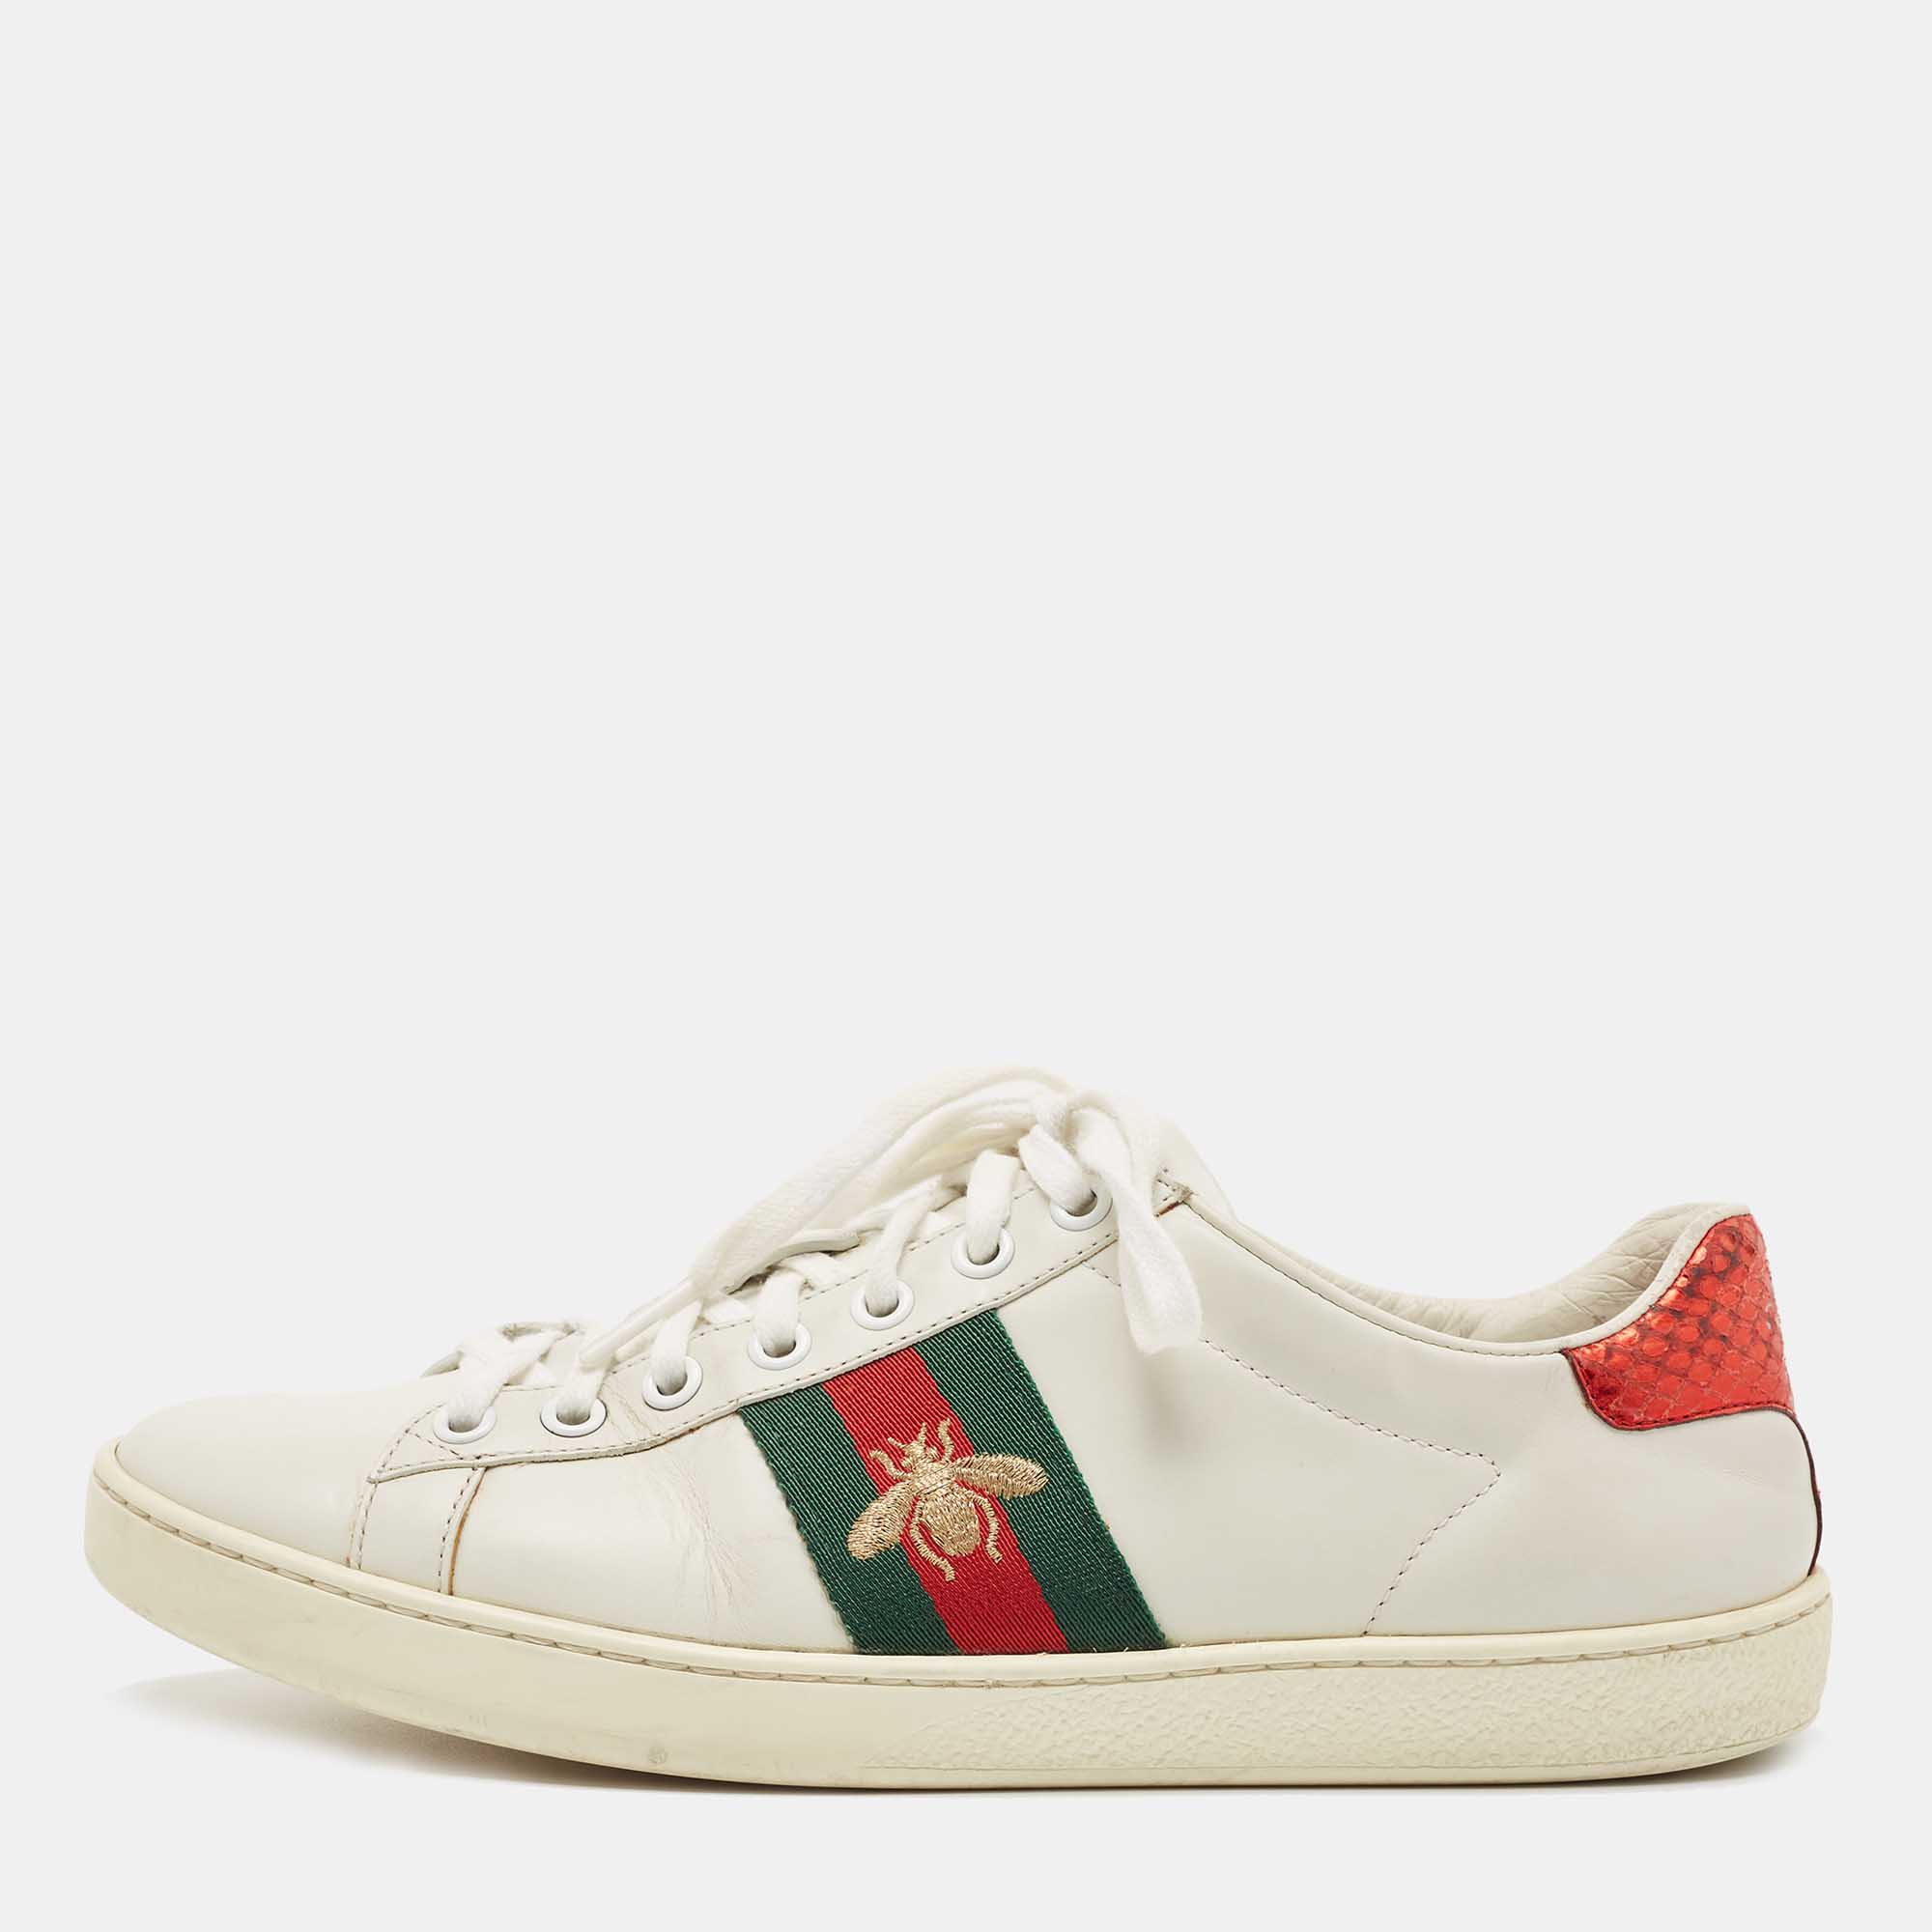 Stacked with signature details this Gucci pair is rendered in leather and is designed with lace up vamps rubber soles and the iconic bee motif on Web stripe. The visual display of this pair is enhanced with contrasting color trims carrying the brand label on the counters.